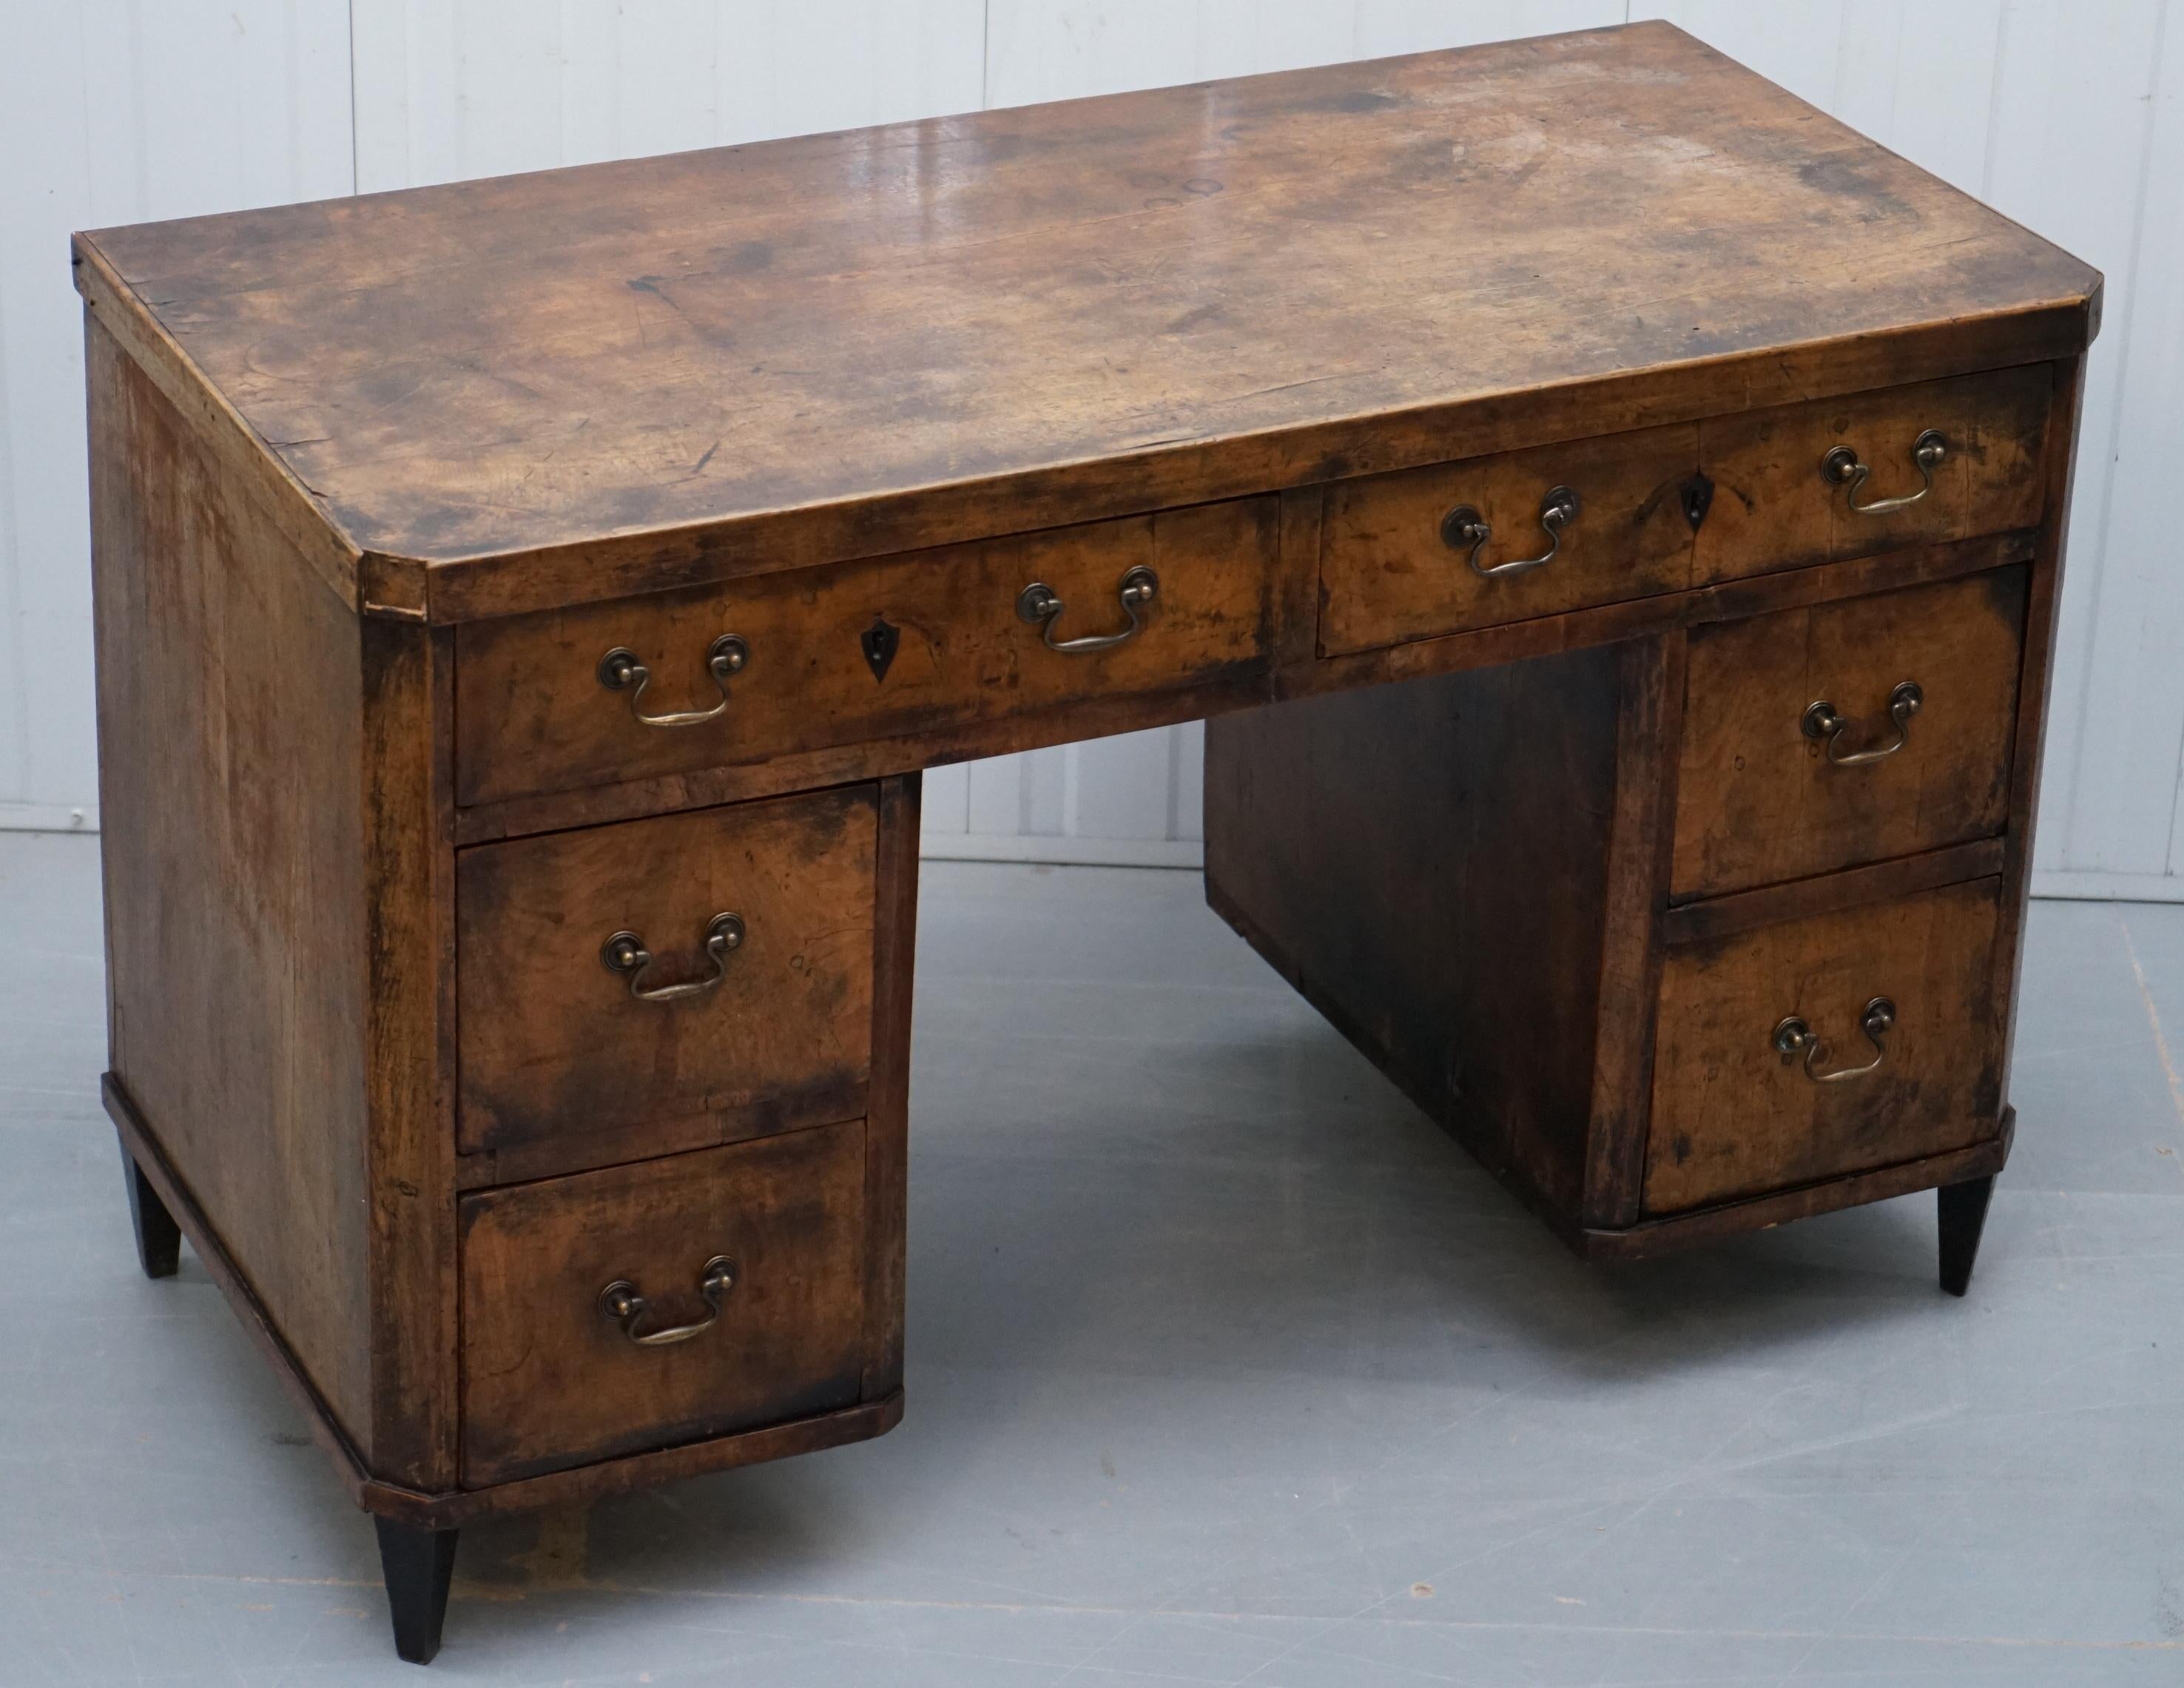 We are delighted to offer for sale this lovely original circa 1840 solid walnut desk

A good looking and well-made piece, the timber patina is as natural or vintage as it comes, it shows every bit of its 180 odd years of service

We have deep